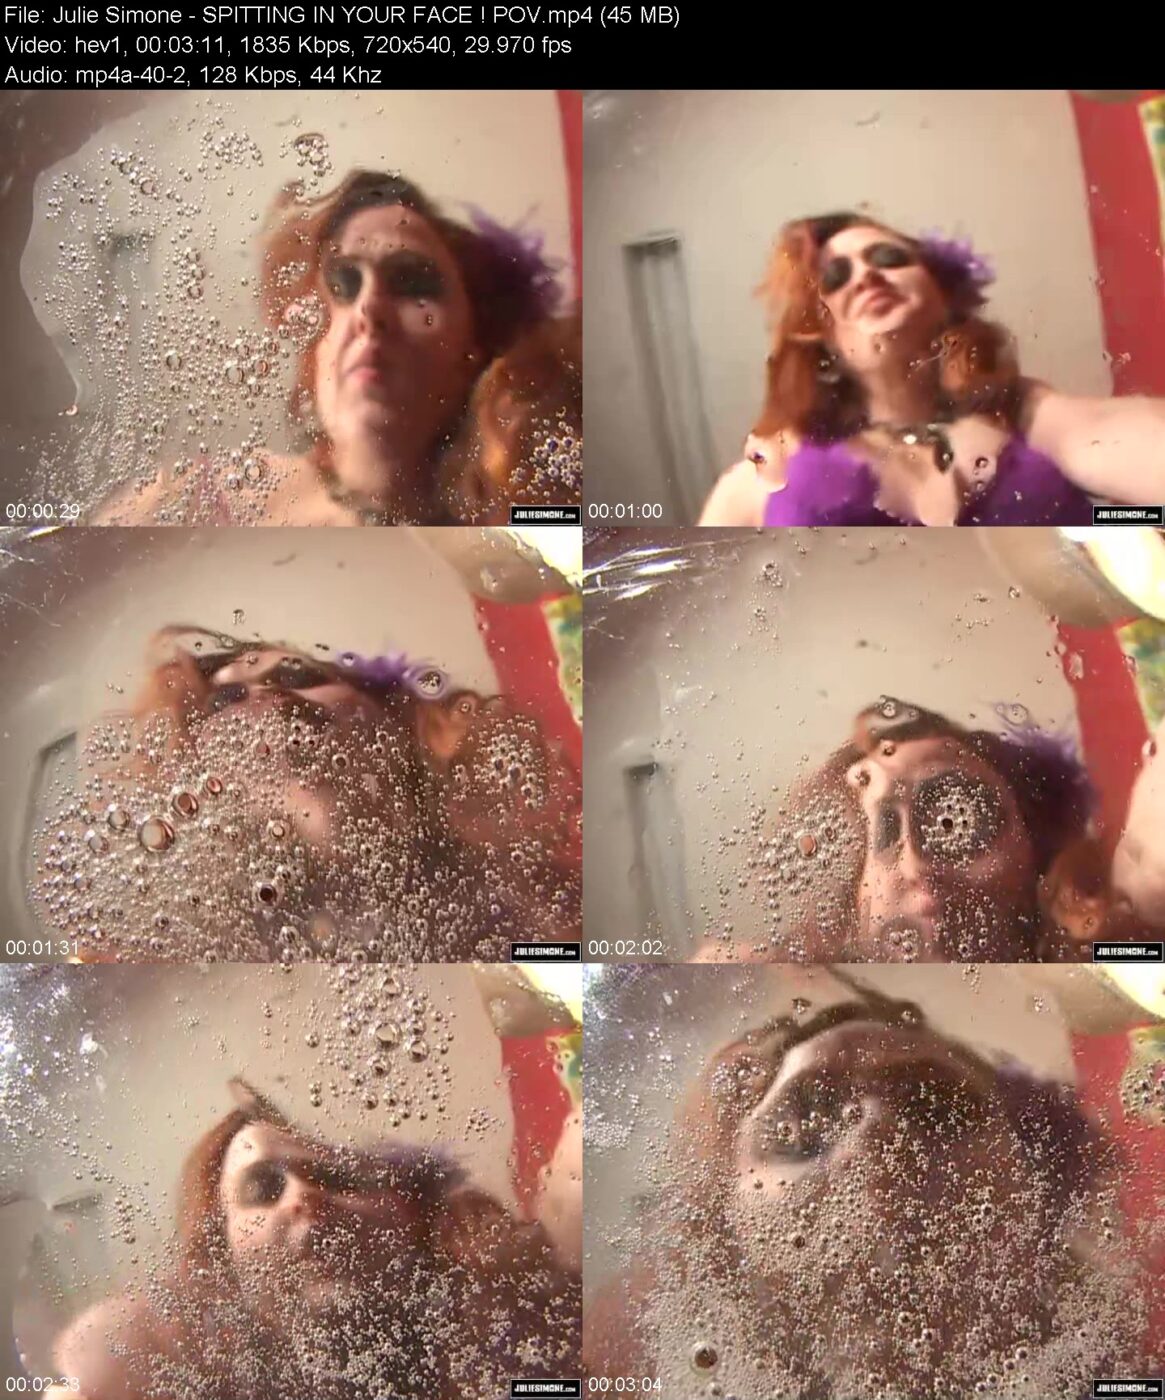 Actress: Julie Simone. Title and Studio: SPITTING IN YOUR FACE ! POV